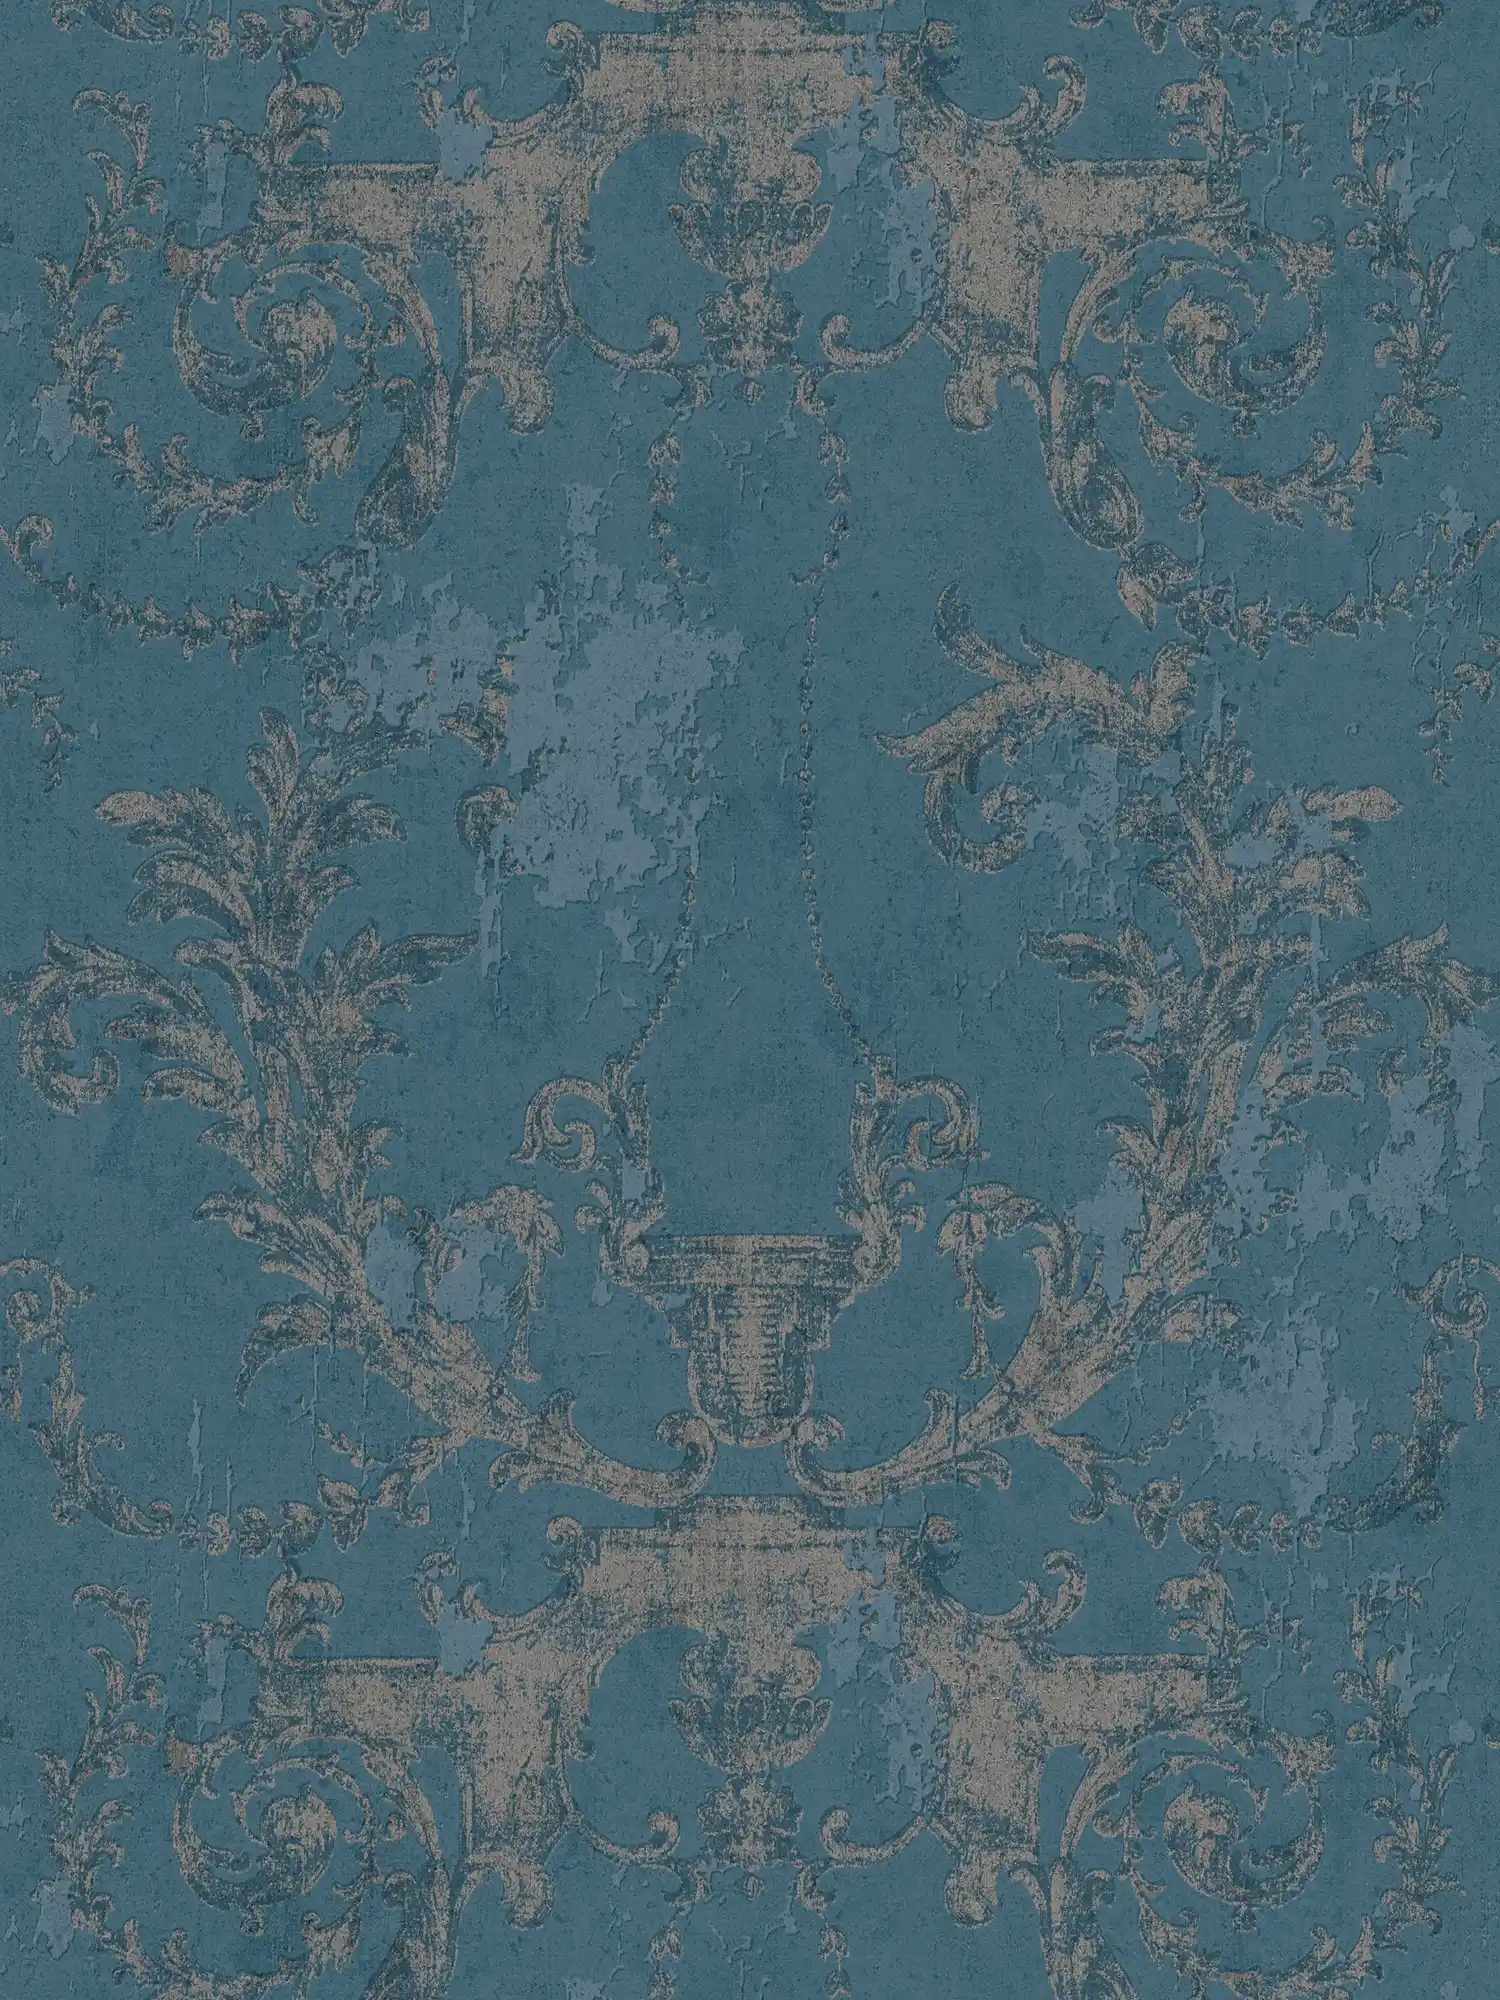 Ornament wallpaper vintage style & rustic - blue, silver
